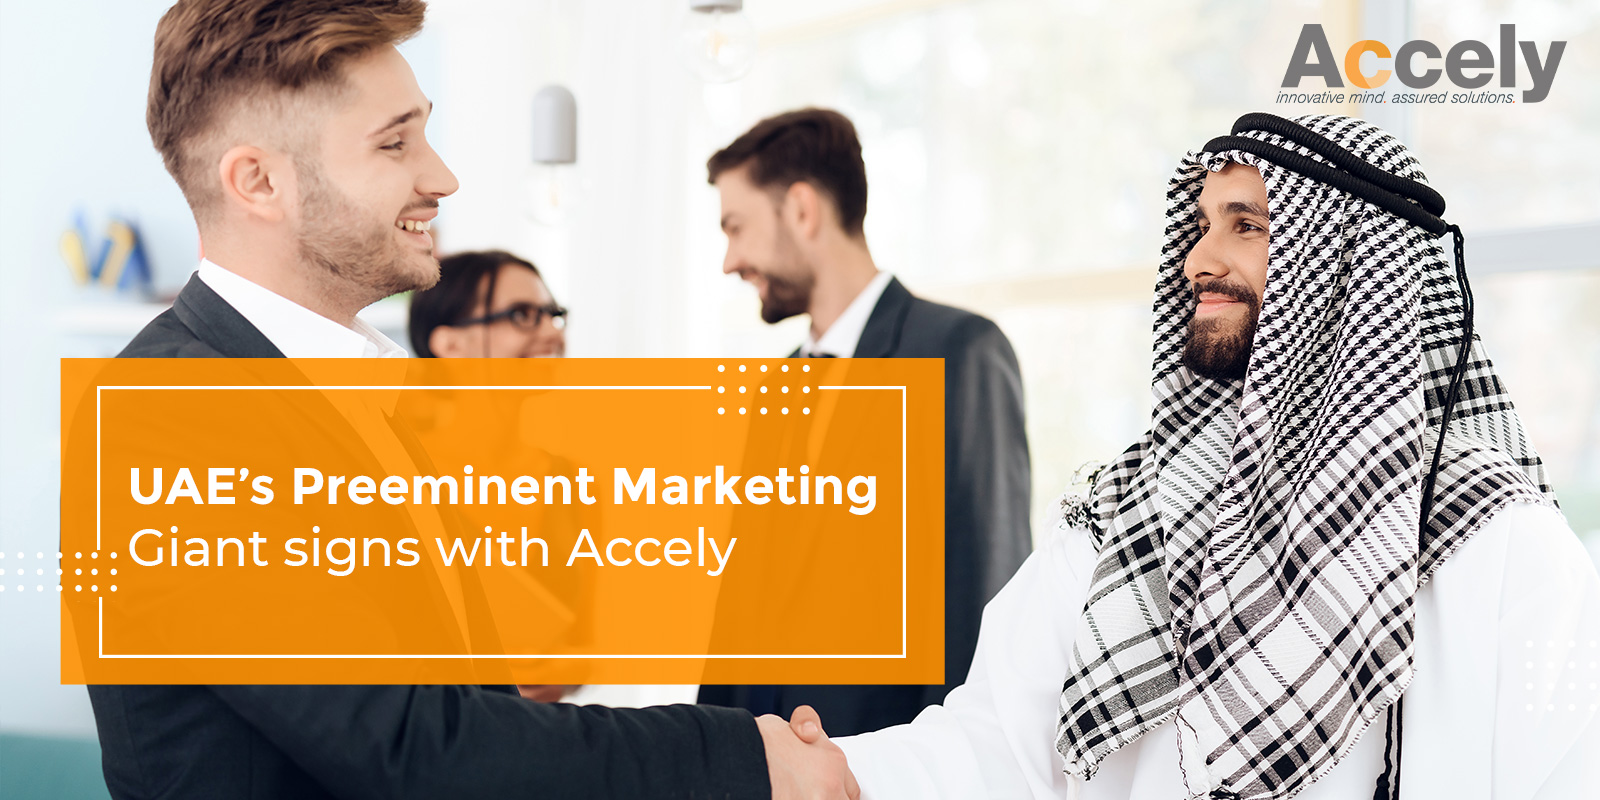 UAE’s Preeminent Marketing Giant signs with Accely